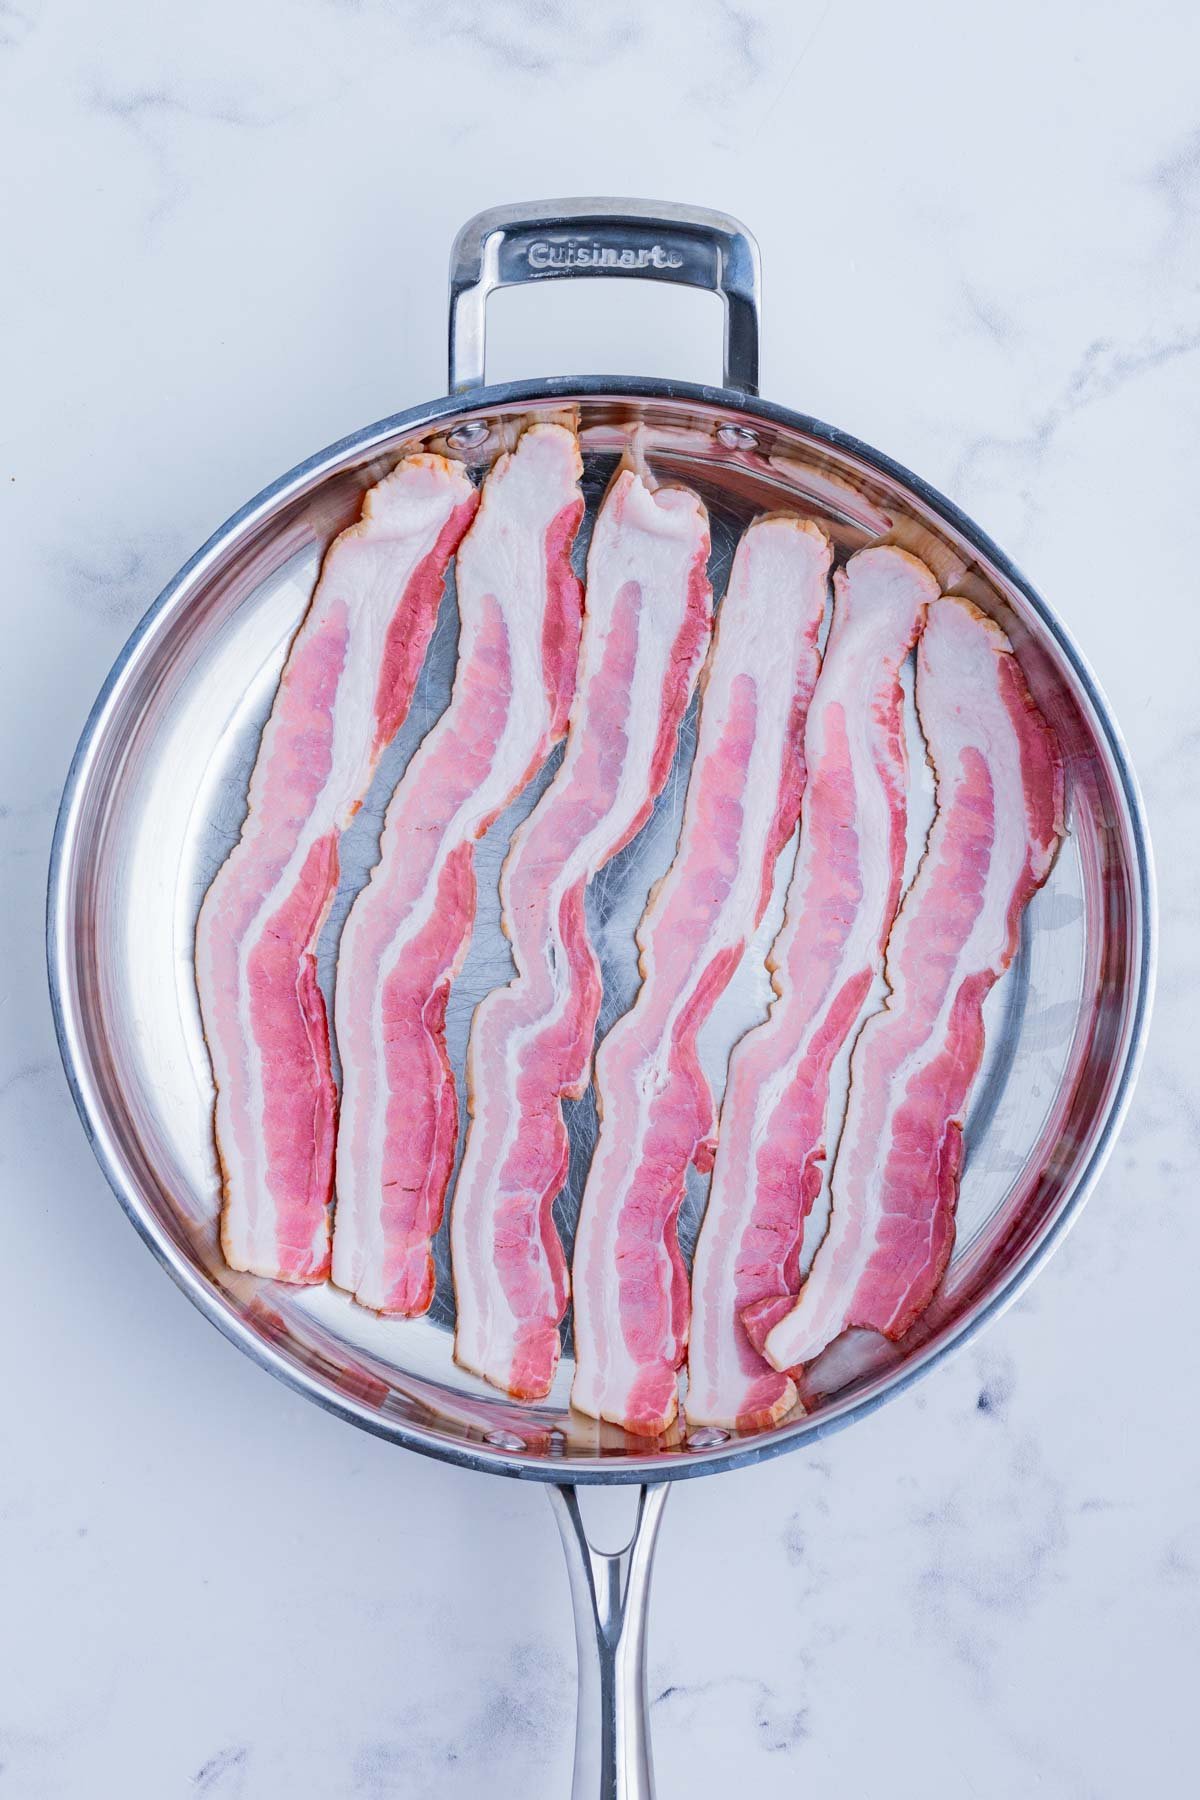 Raw bacon is lined up in a skillet.